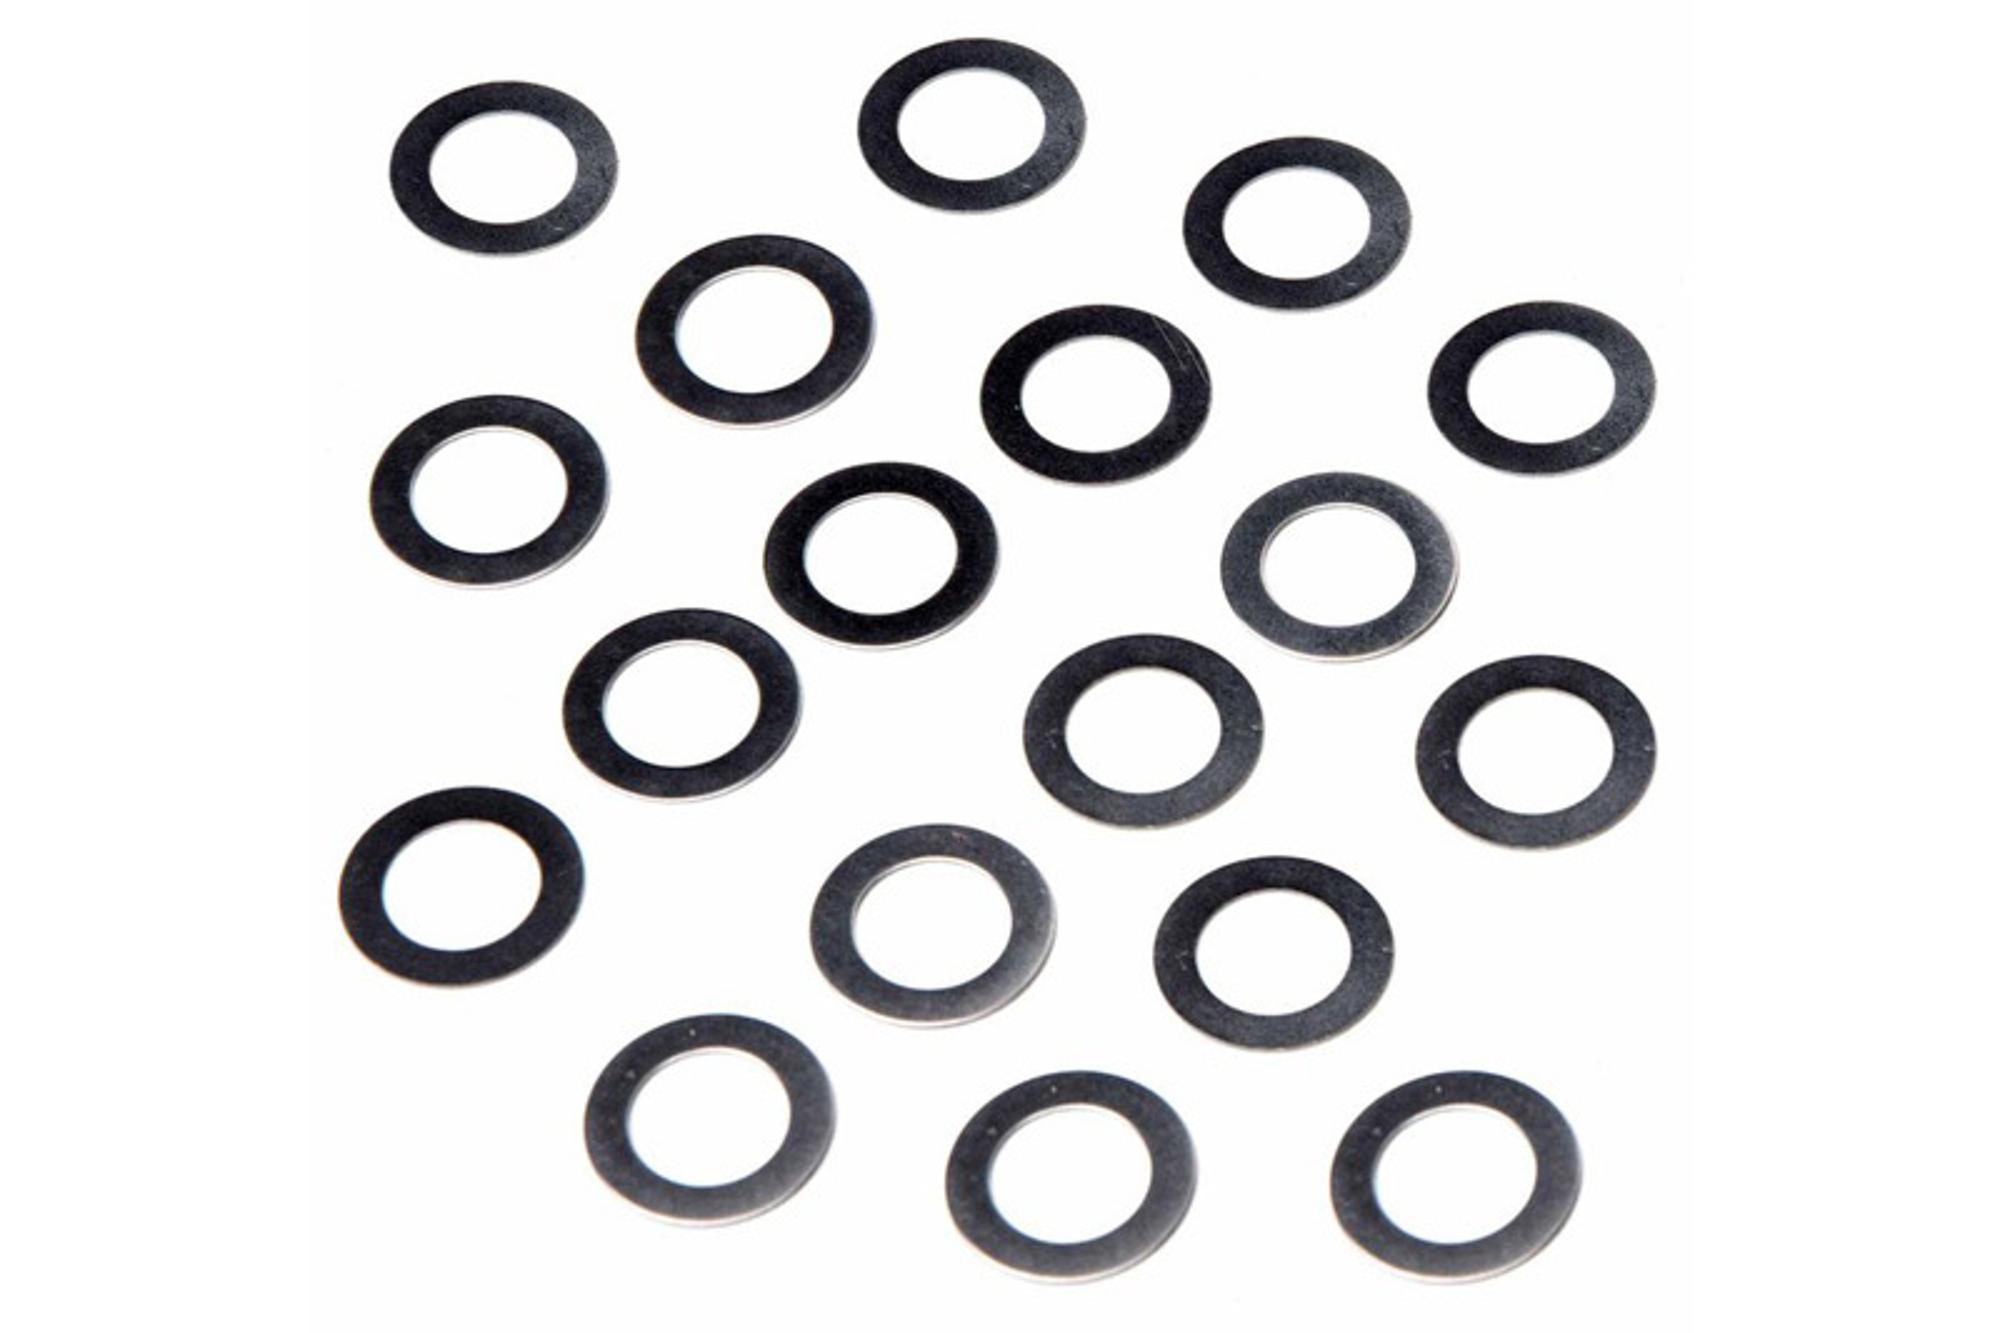 Axial 9.5 x 16mm Shim Pack